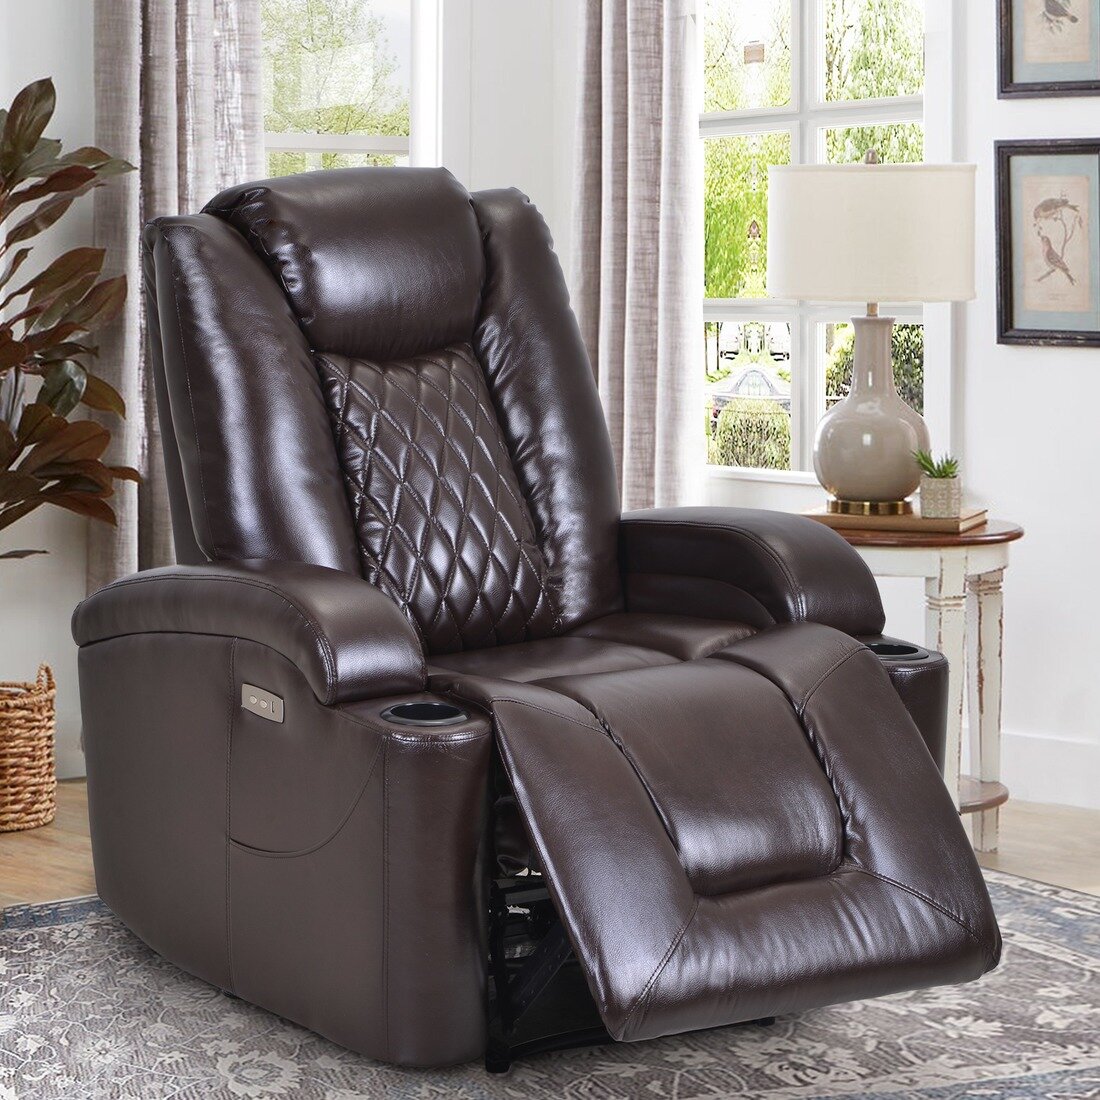 Details about   Leather Recliner Armchair Lounge Chair Velvet Reclining Cinema Studio Sofa Seat 